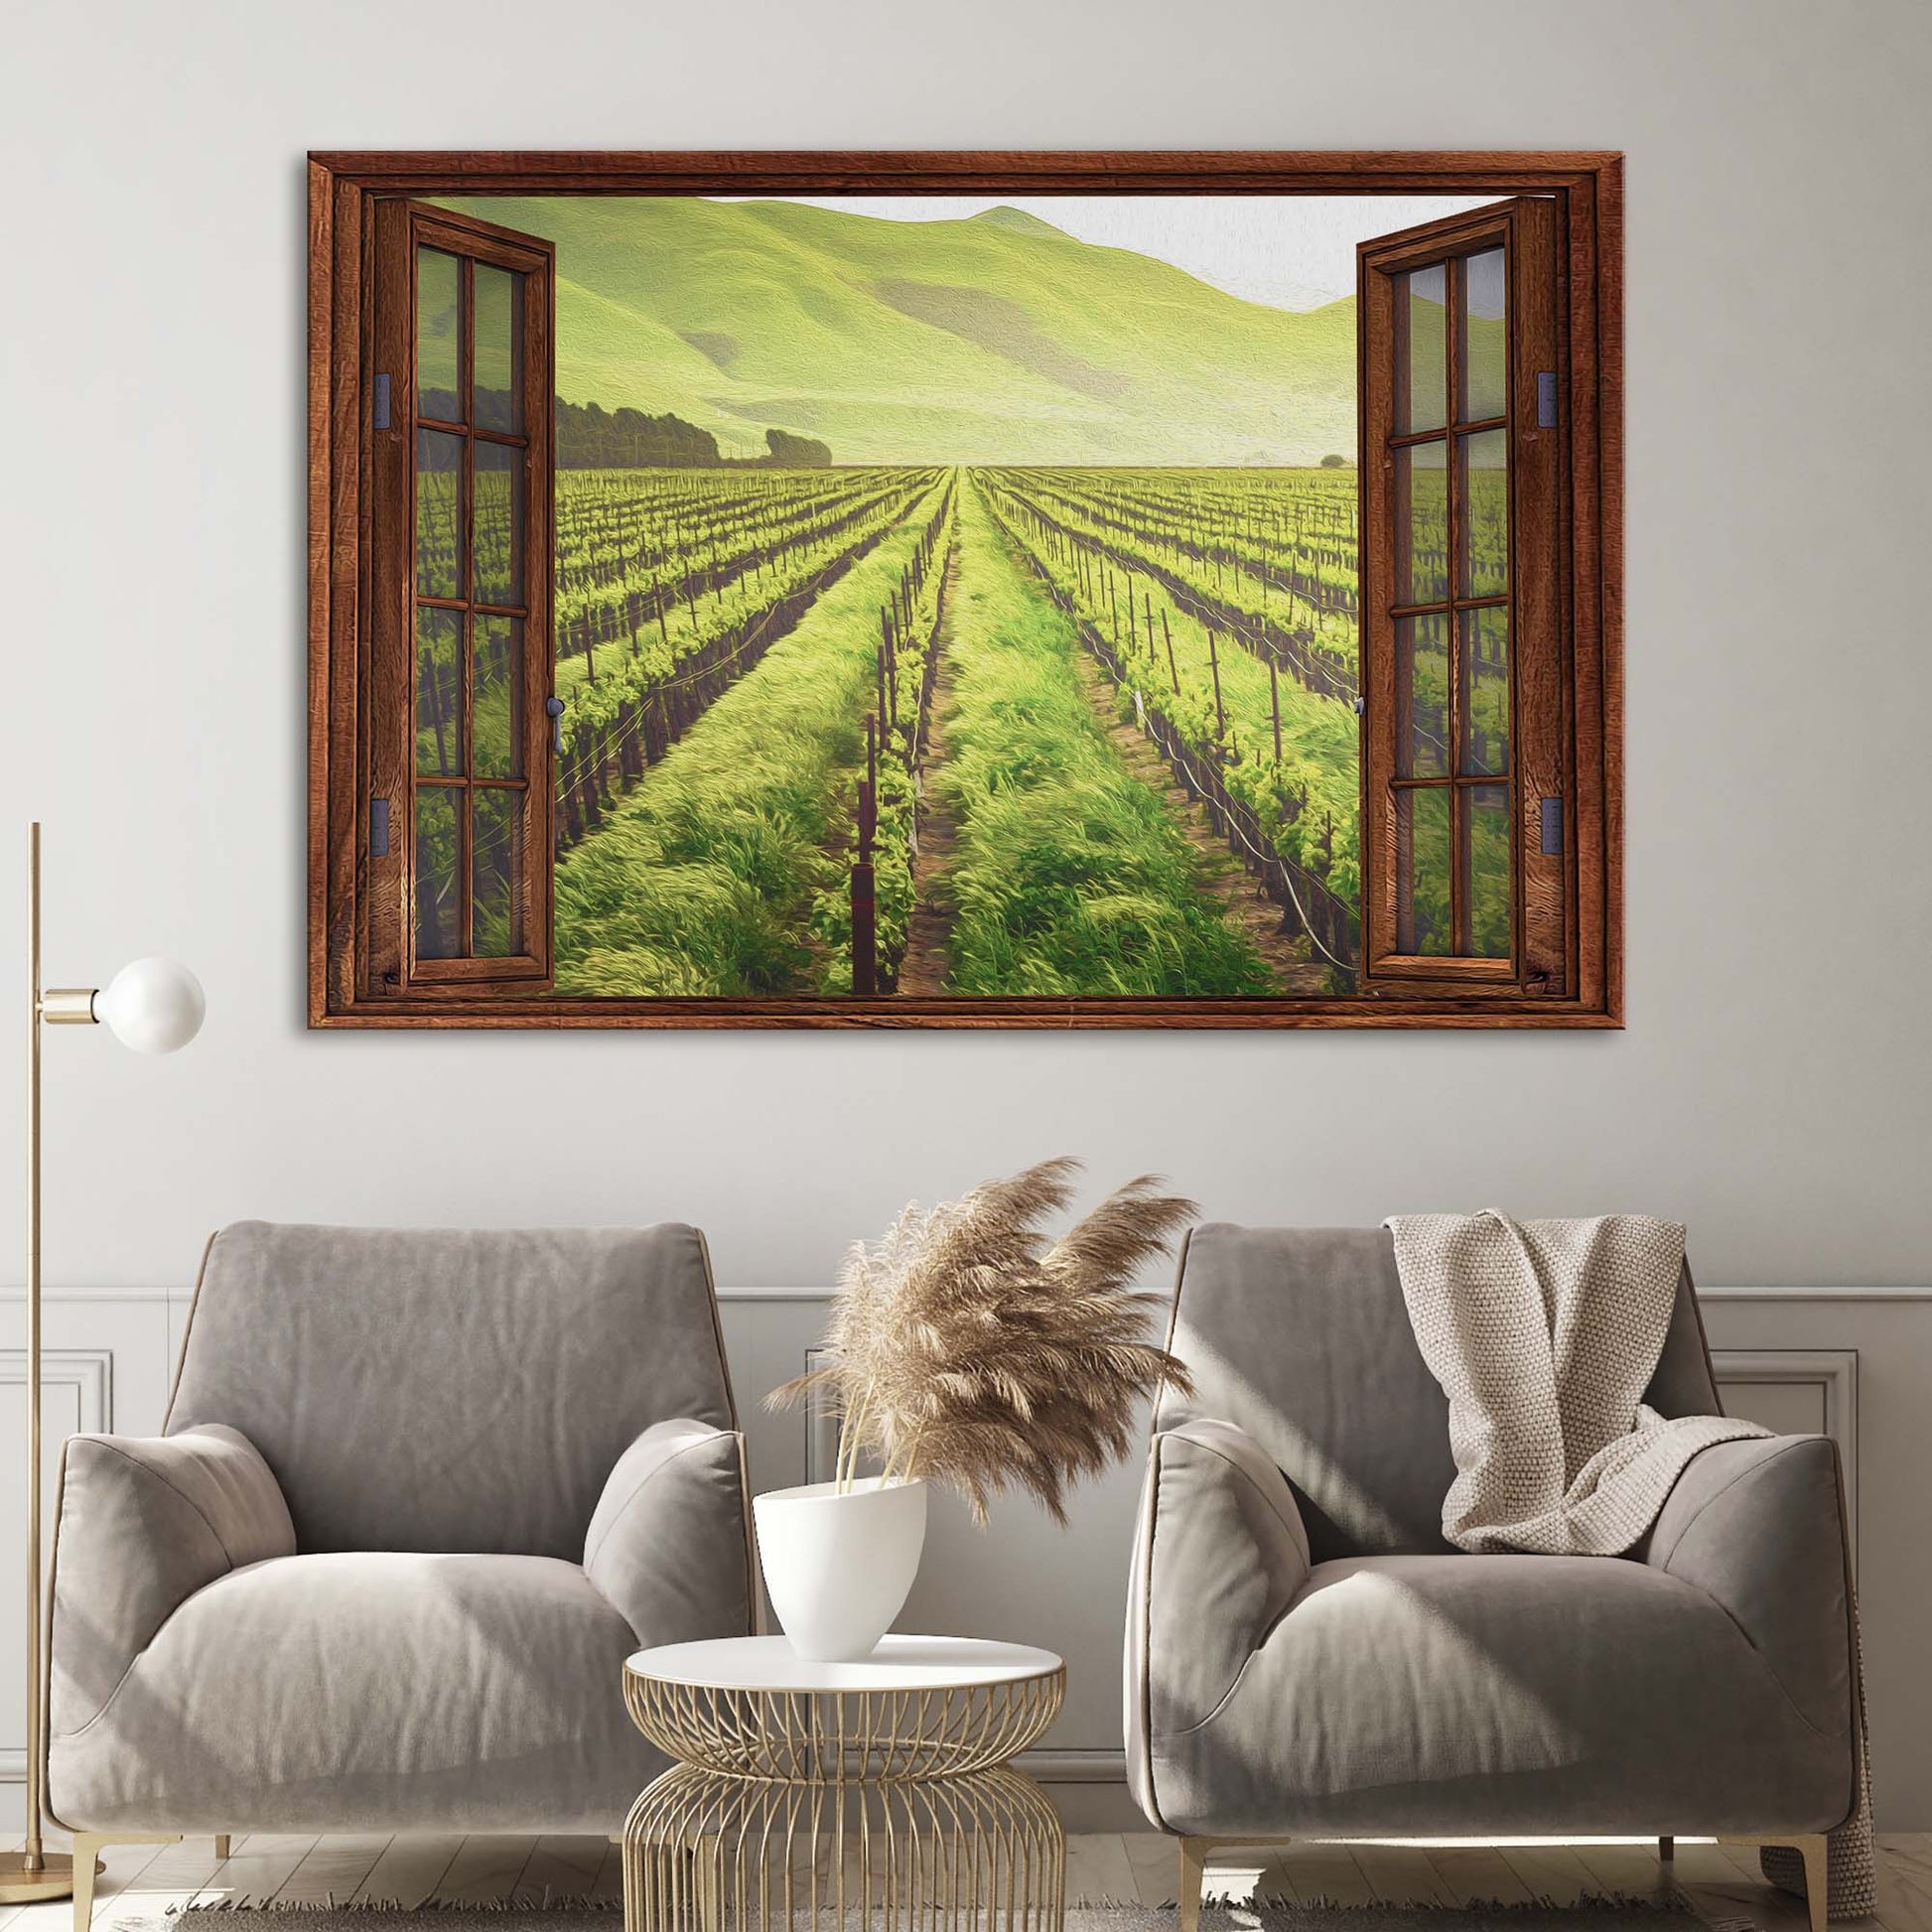 Vineyard Window - Image by Tailored Canvases